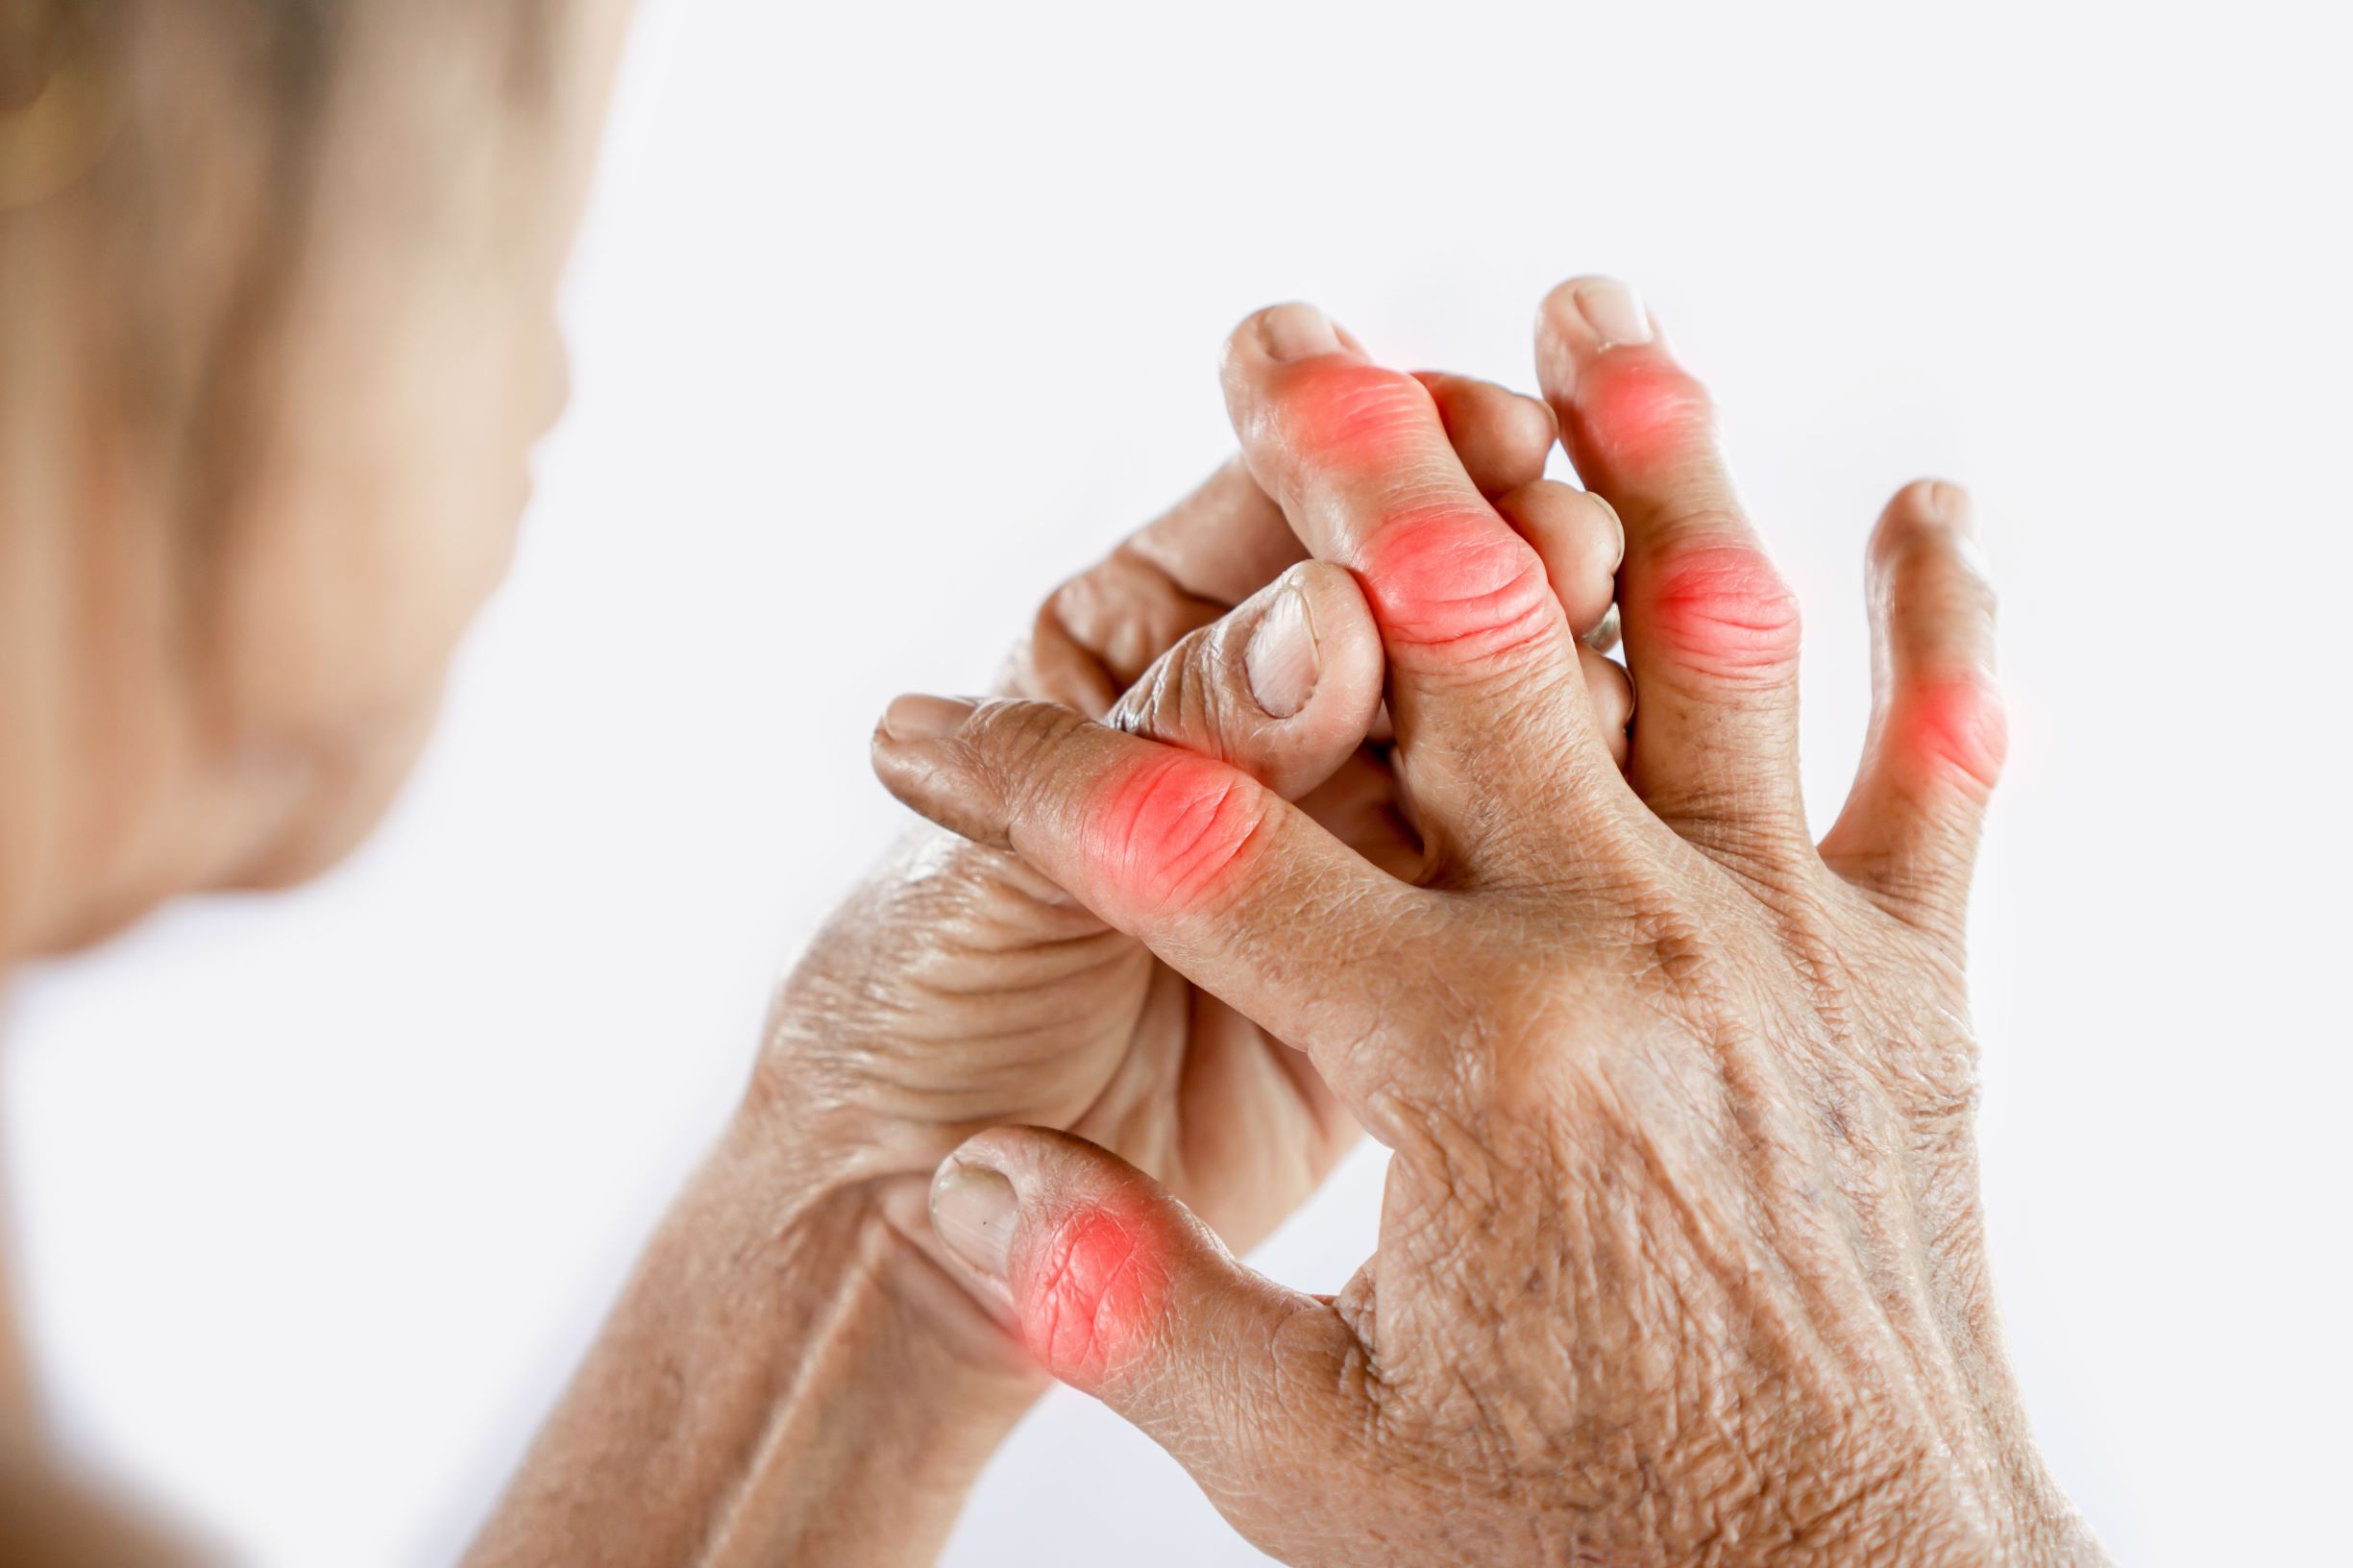 Can I Use CBD Balm For Pain Relief, Arthritis and Joint Pain?